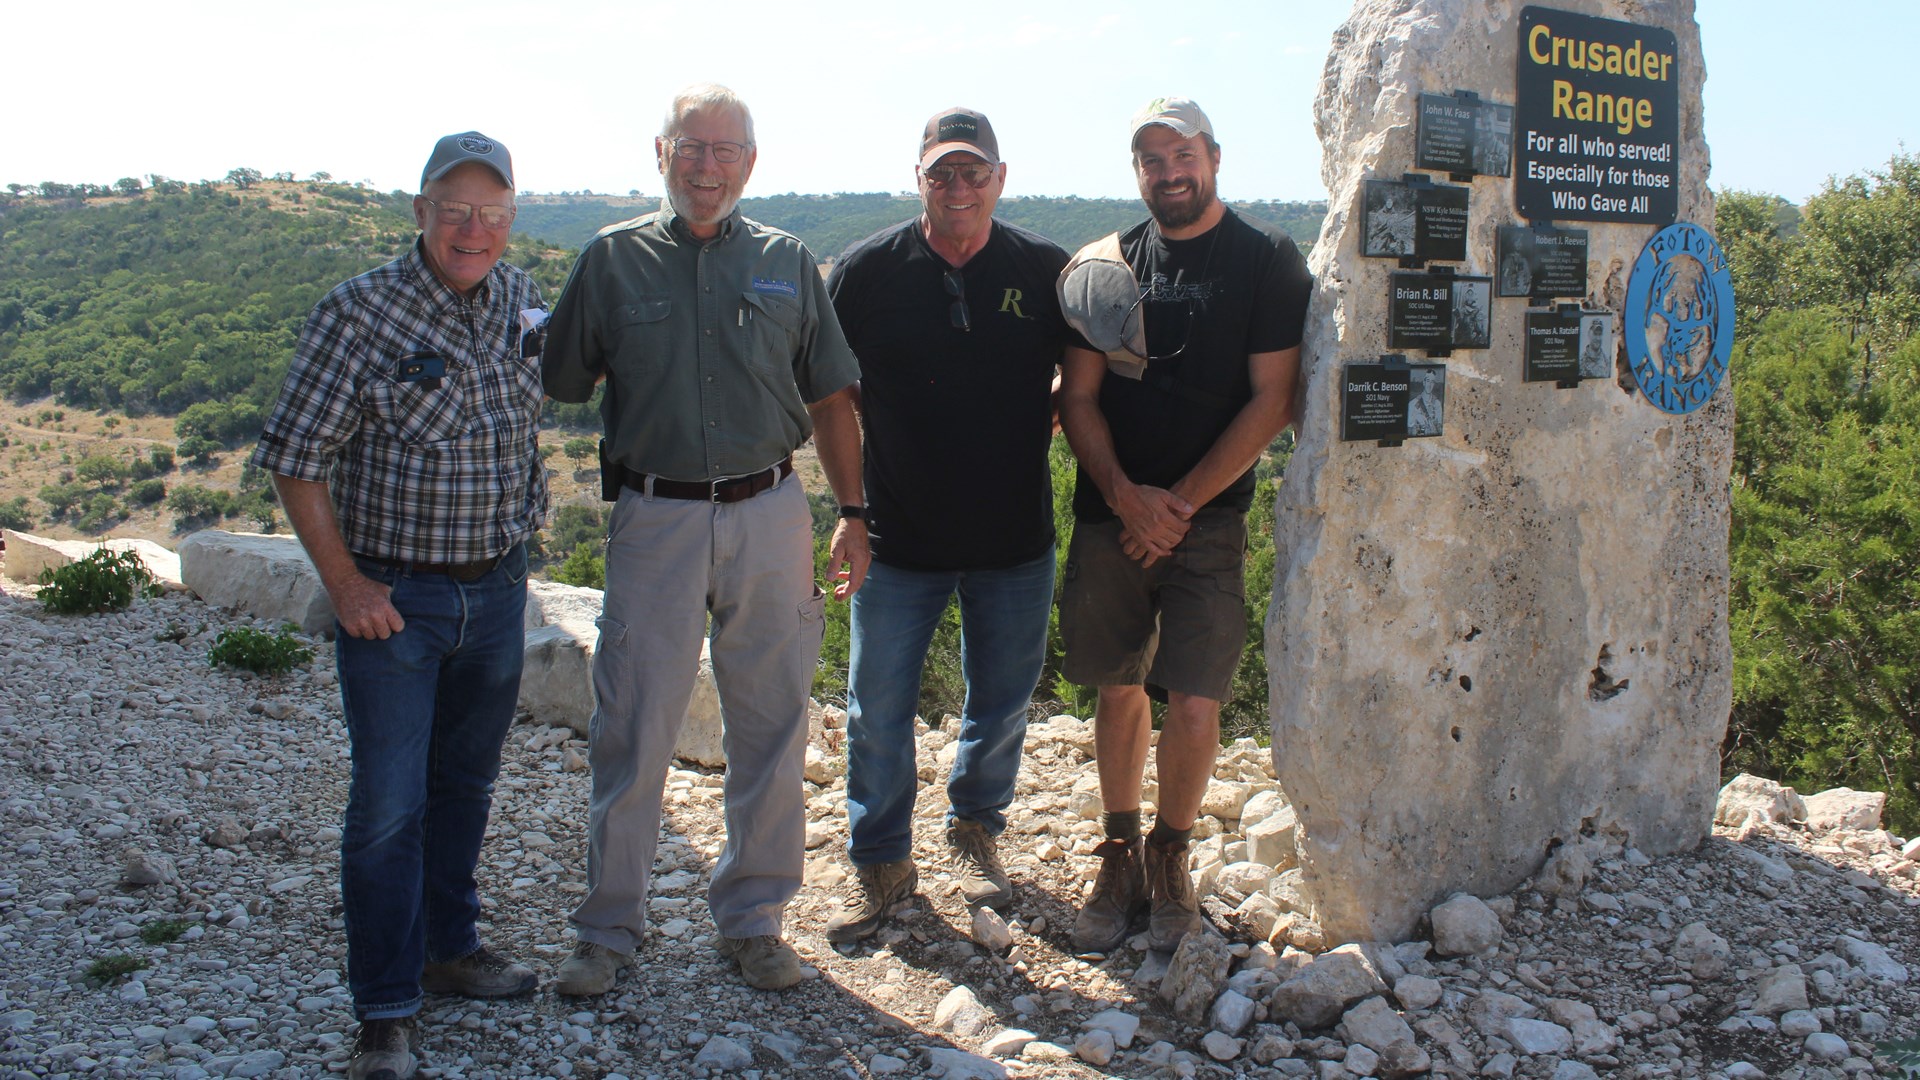 Left to right, Boddington, Tim Fallon, Ken D’Arcy and Mike Schoby at the “Crusader Range” on Fallon’s FTW Ranch next to a monument to FTW/SAAM students and friends who have been killed in action in Southwest Asia.